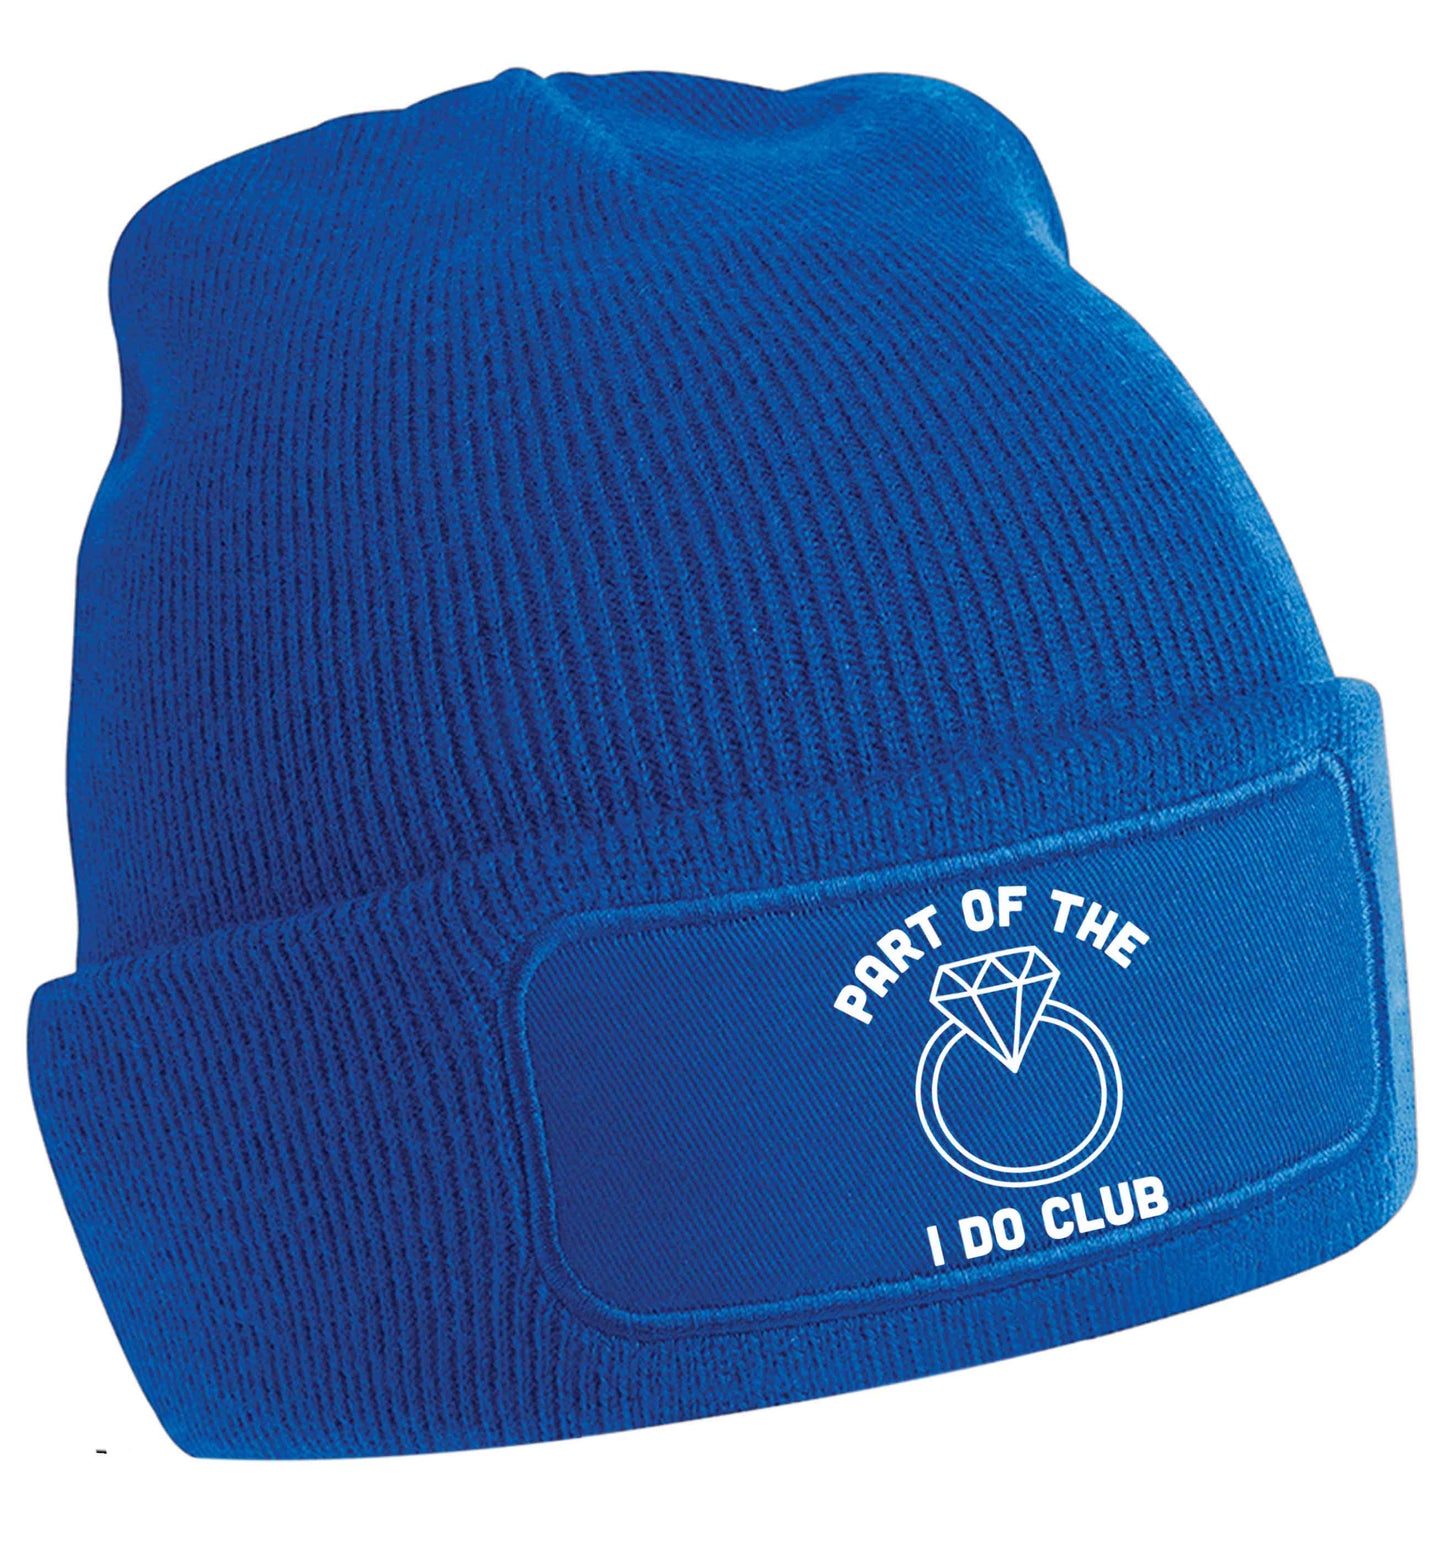 Part of the I do club | Beanie hat